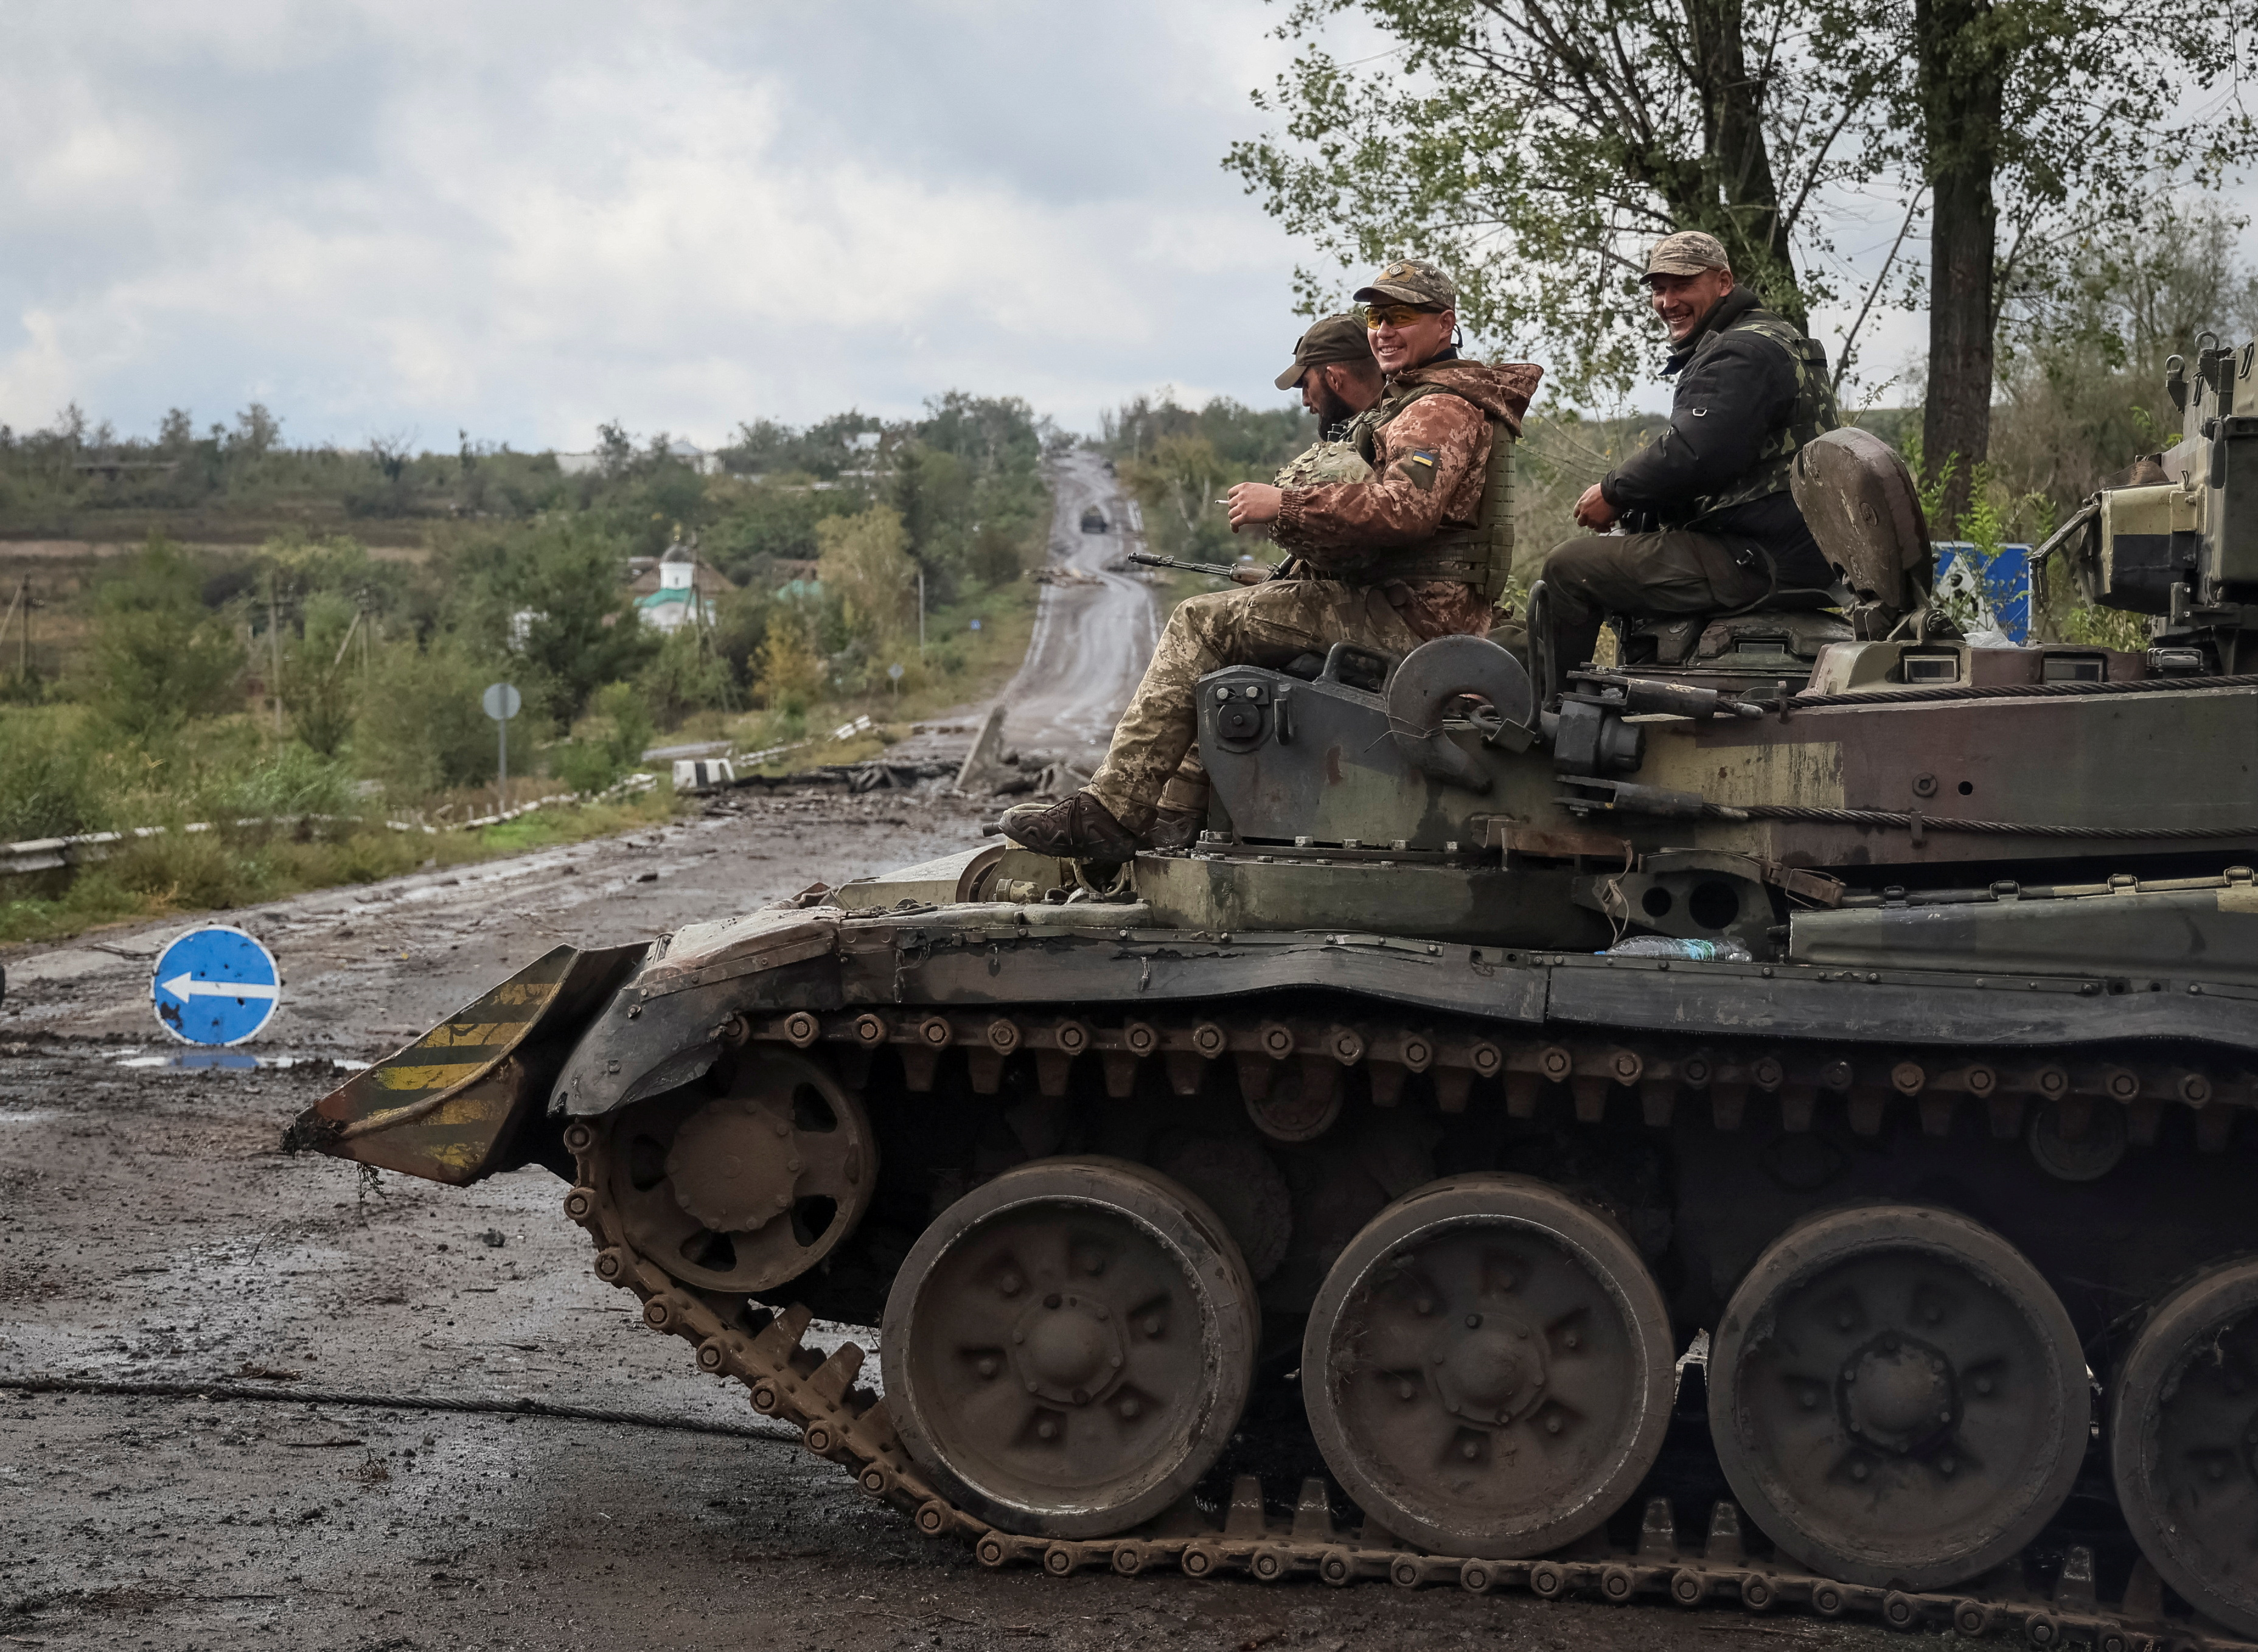 Ukrainian servicemen ride on Armoured Personnel Carrier (APC), as Russia's attack on Ukraine continues, in the village of Dolyna, Ukraine September 23, 2022.  REUTERS/Gleb Garanich